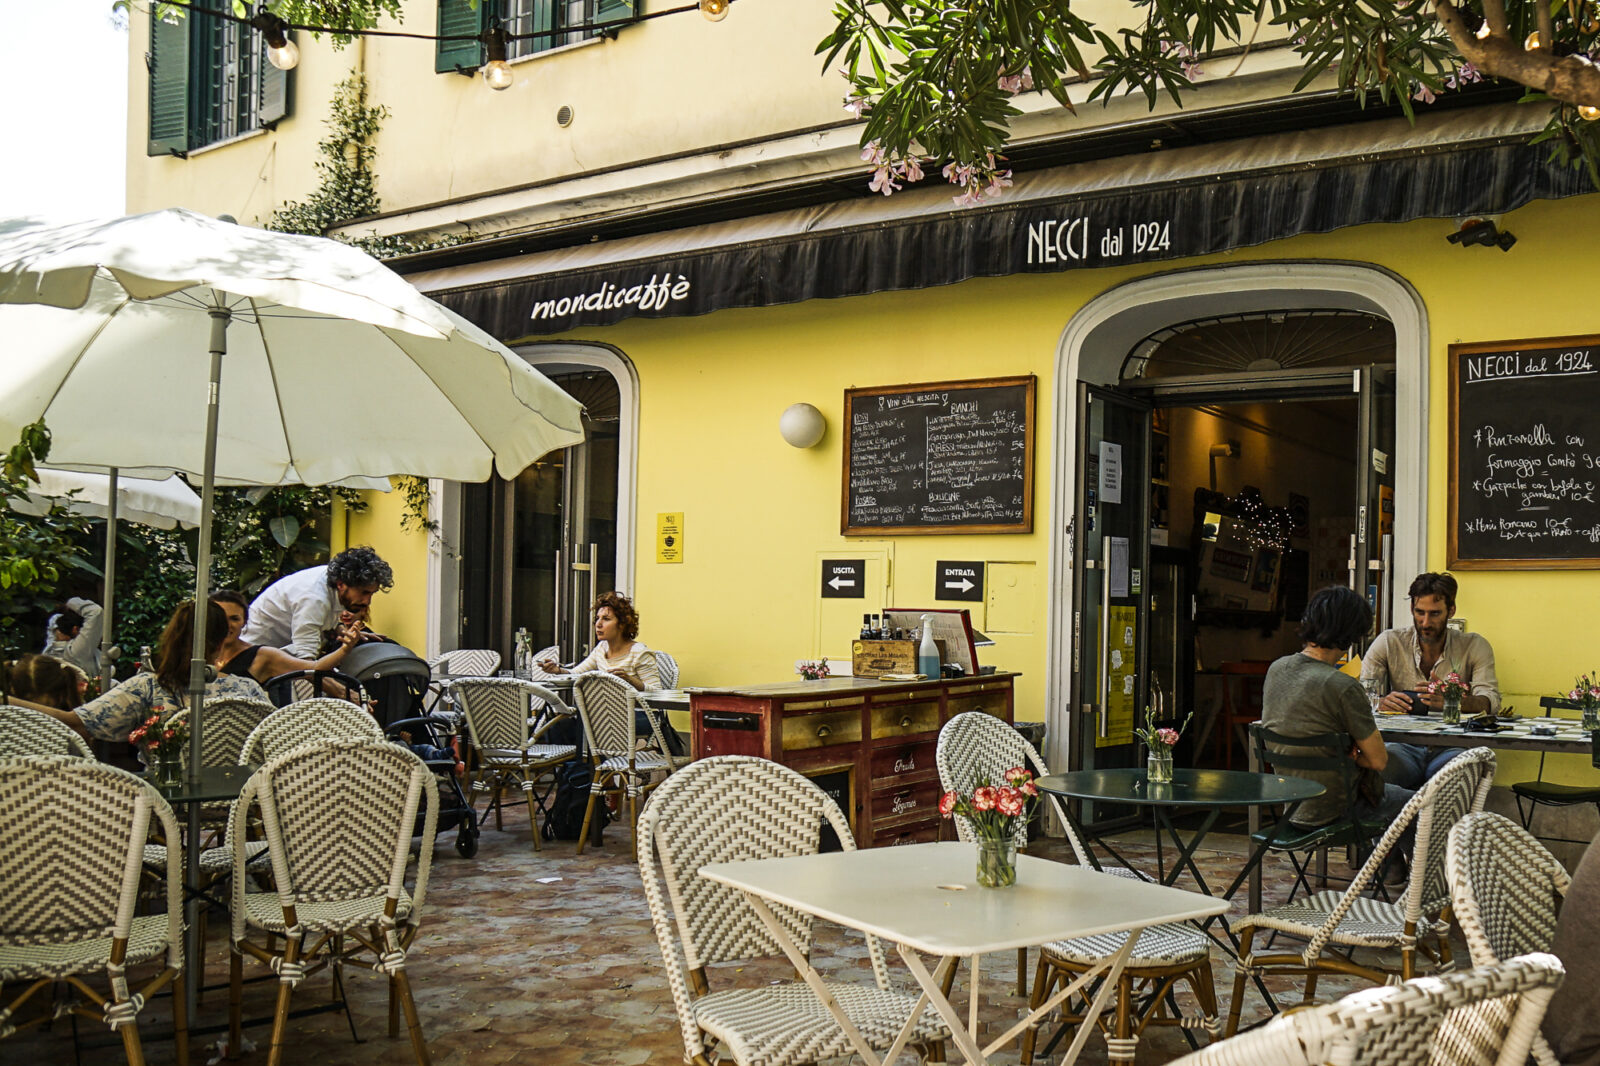 Necci dal 1924 is in the Pigneto neighborhood east of Termini and specializes in pecorino.